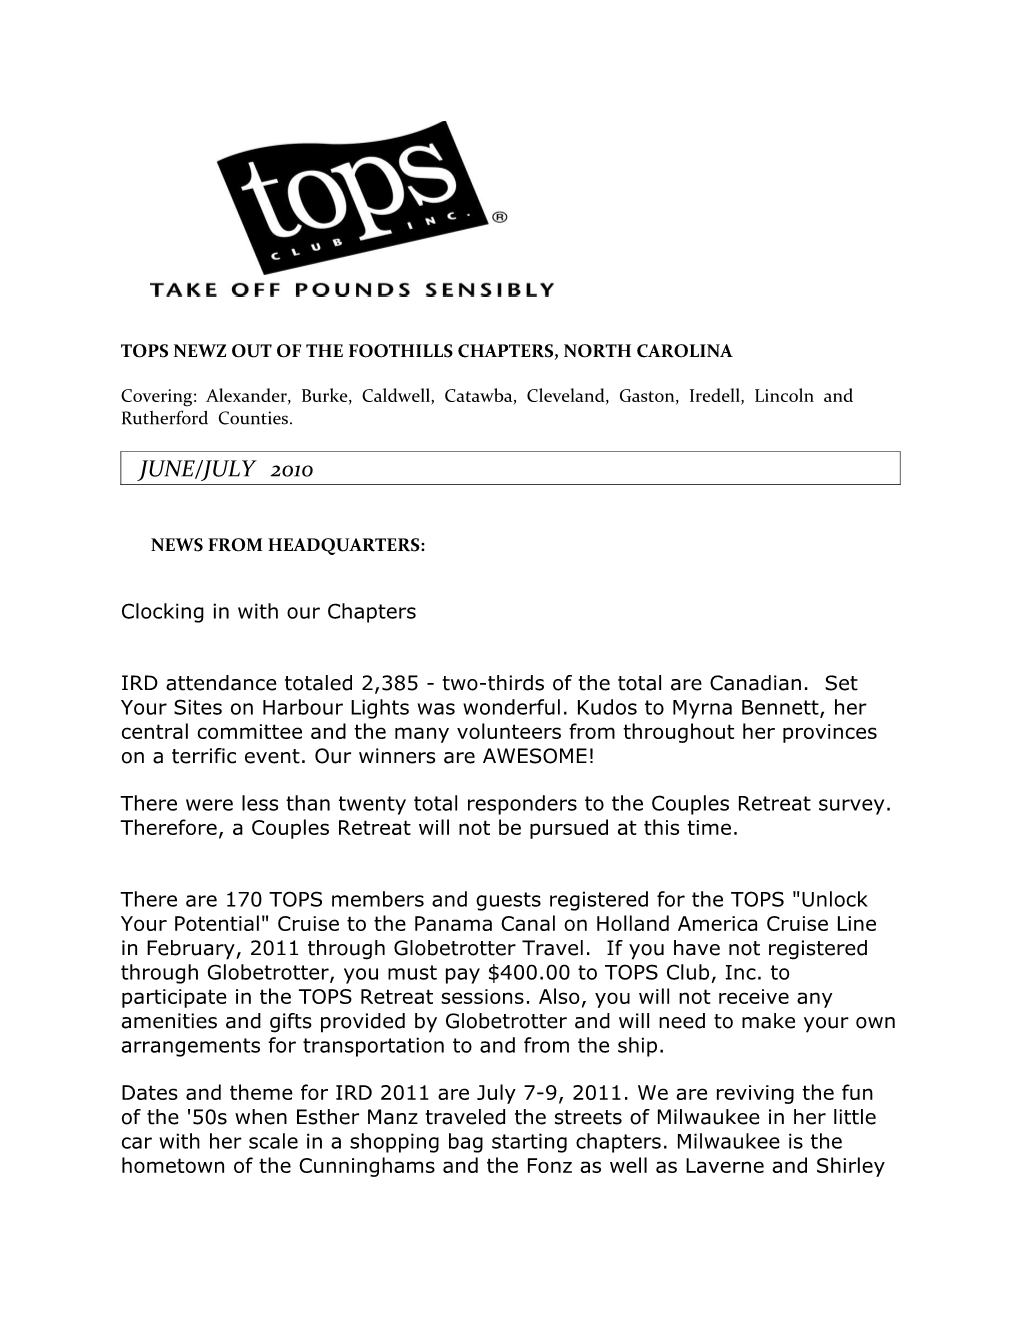 Tops Newz out of the Foothills Chapters, North Carolina